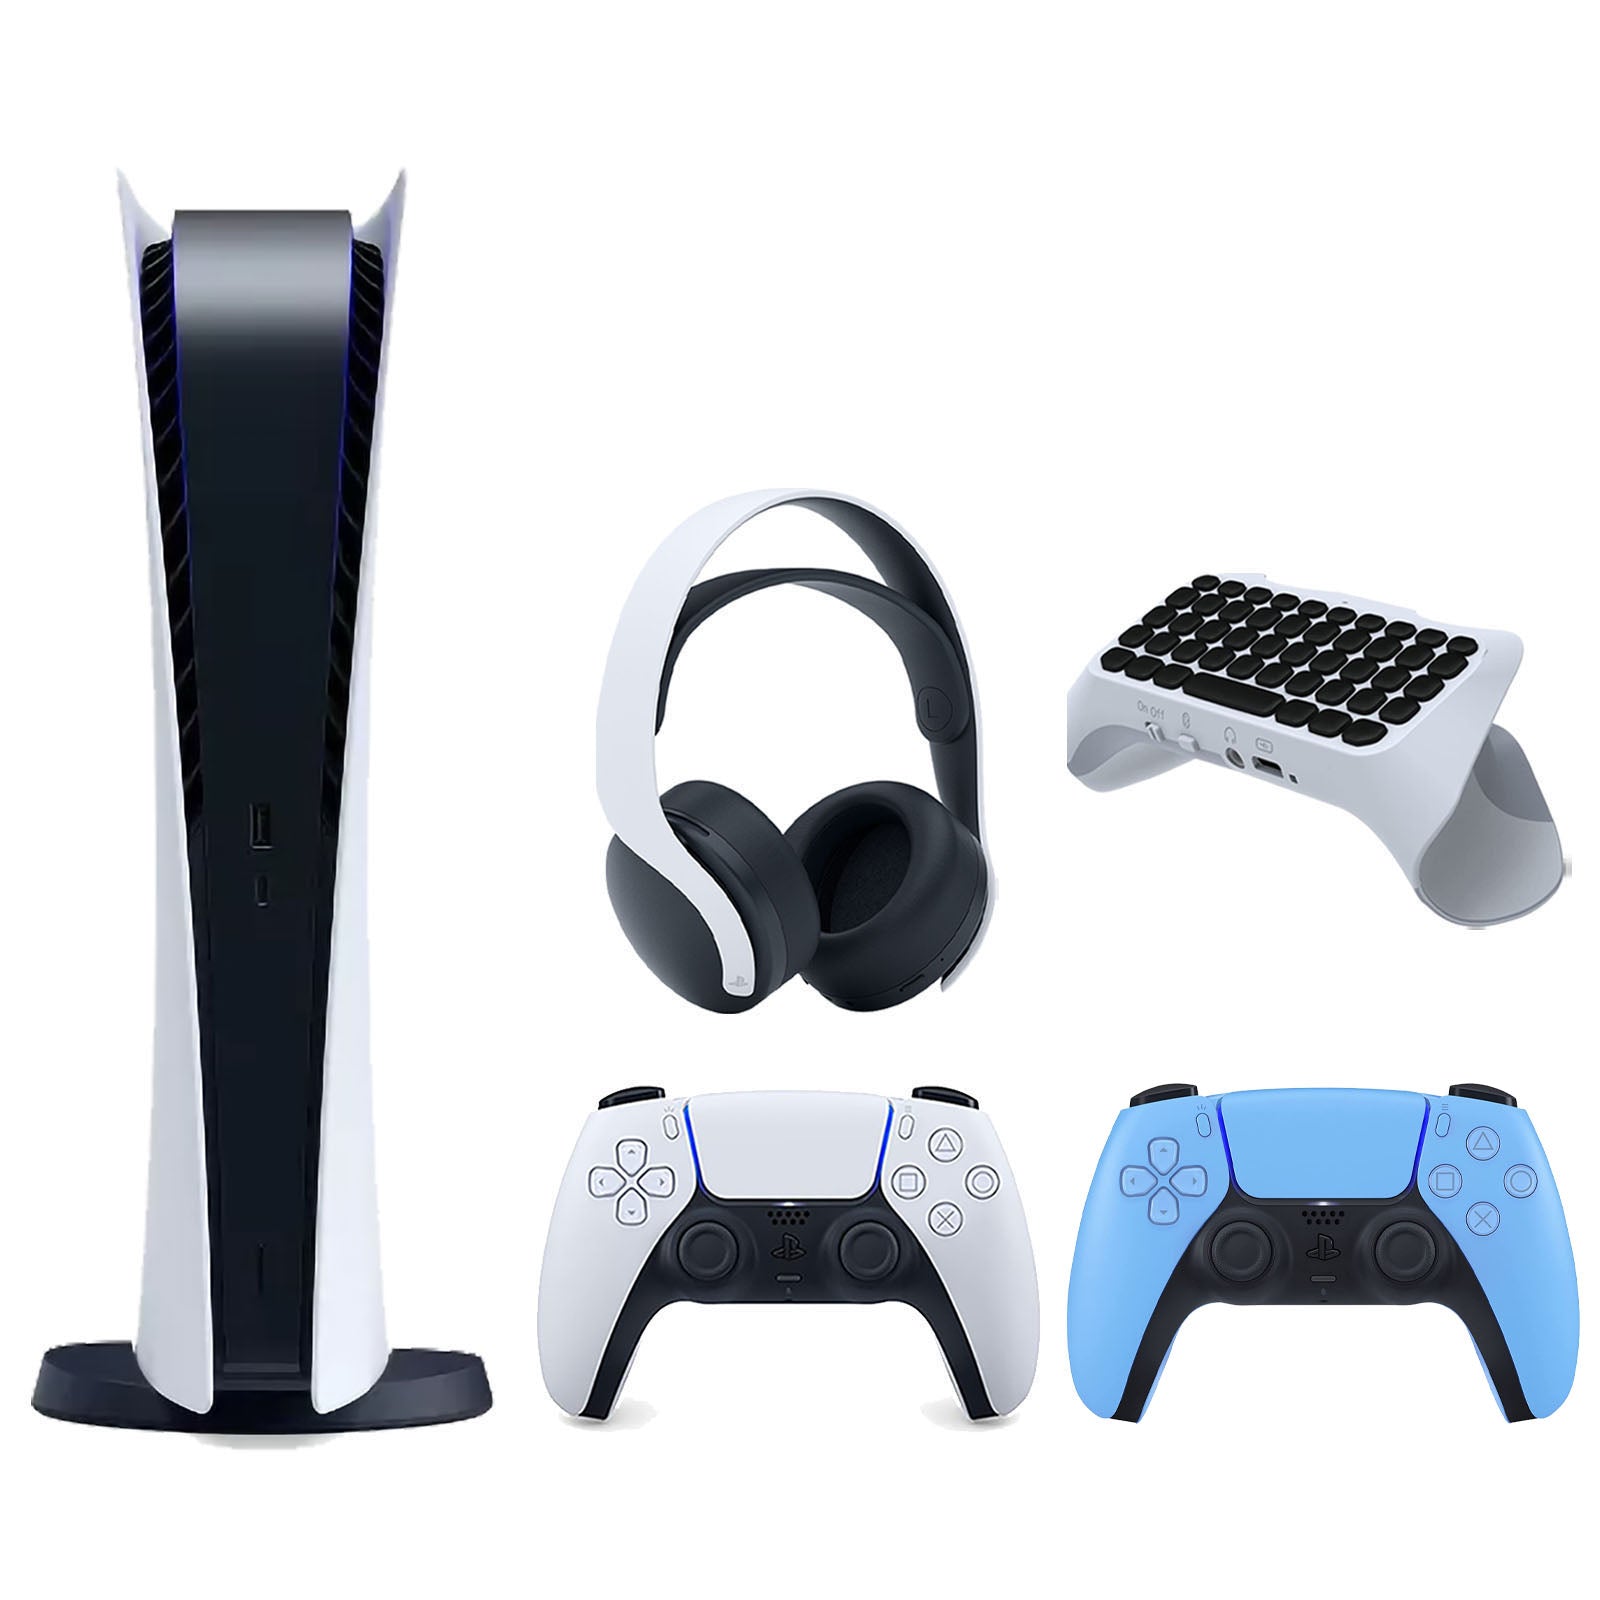 Sony Playstation 5 Digital Edition Console with Extra Blue Controller, White PULSE 3D Headset and Surge QuickType 2.0 Wireless PS5 Controller Keypad Bundle - Pro-Distributing